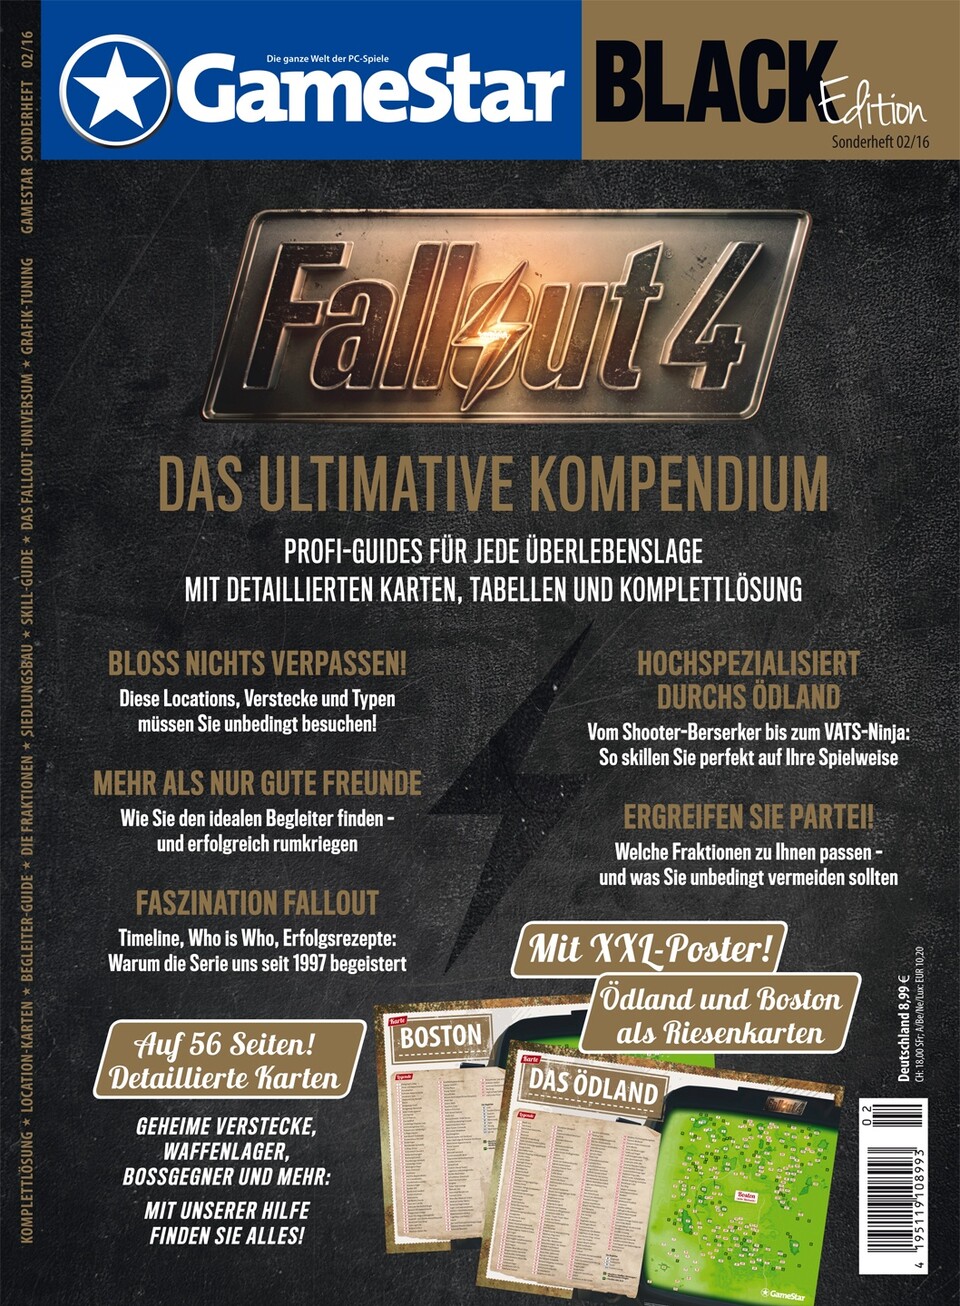 Ab 4.12. am Kiosk: die Fallout 4 Black Edition inklusive XXL-Poster